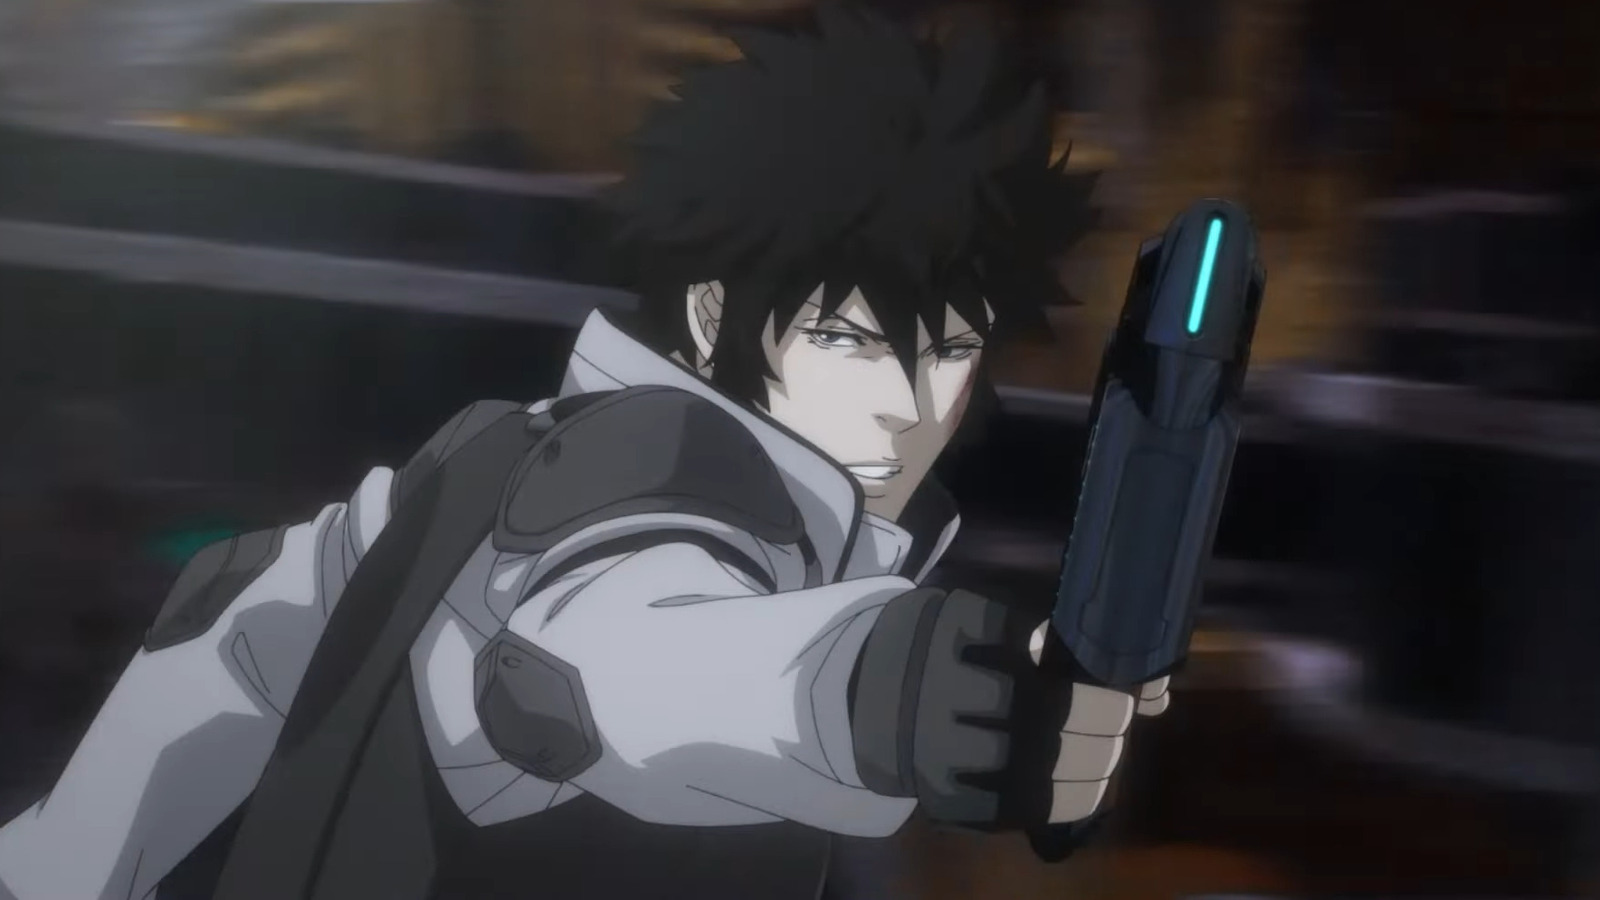 Psycho-Pass proves thought provoking anime | The Polytechnic